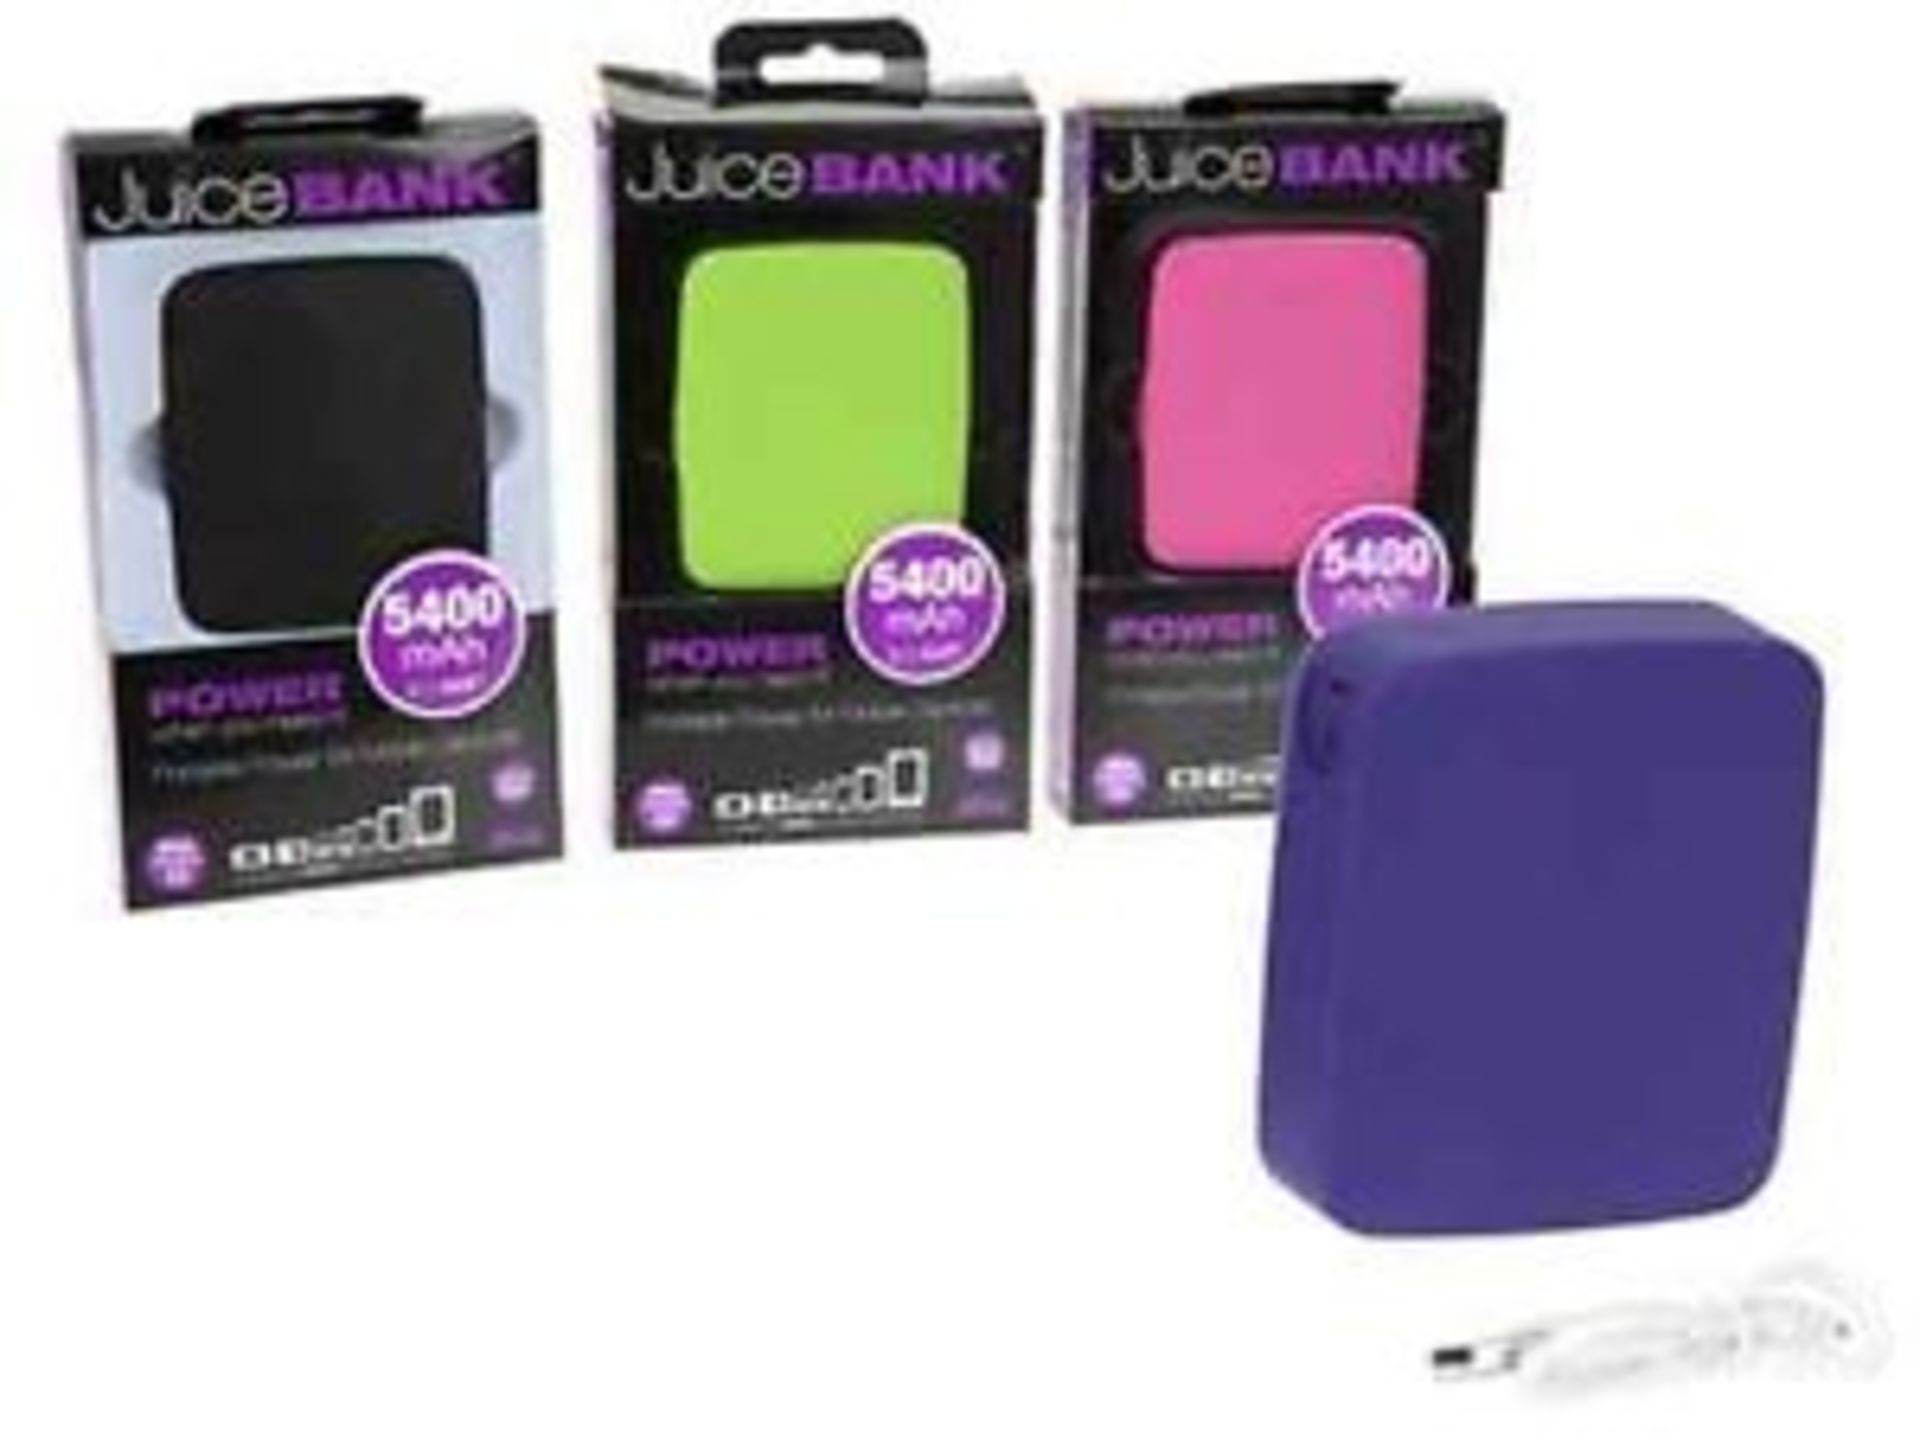 V Grade A Juice Bank phone charger 2.1 amp 5400mAh (total) suitable for mobiles, iPad and tablets